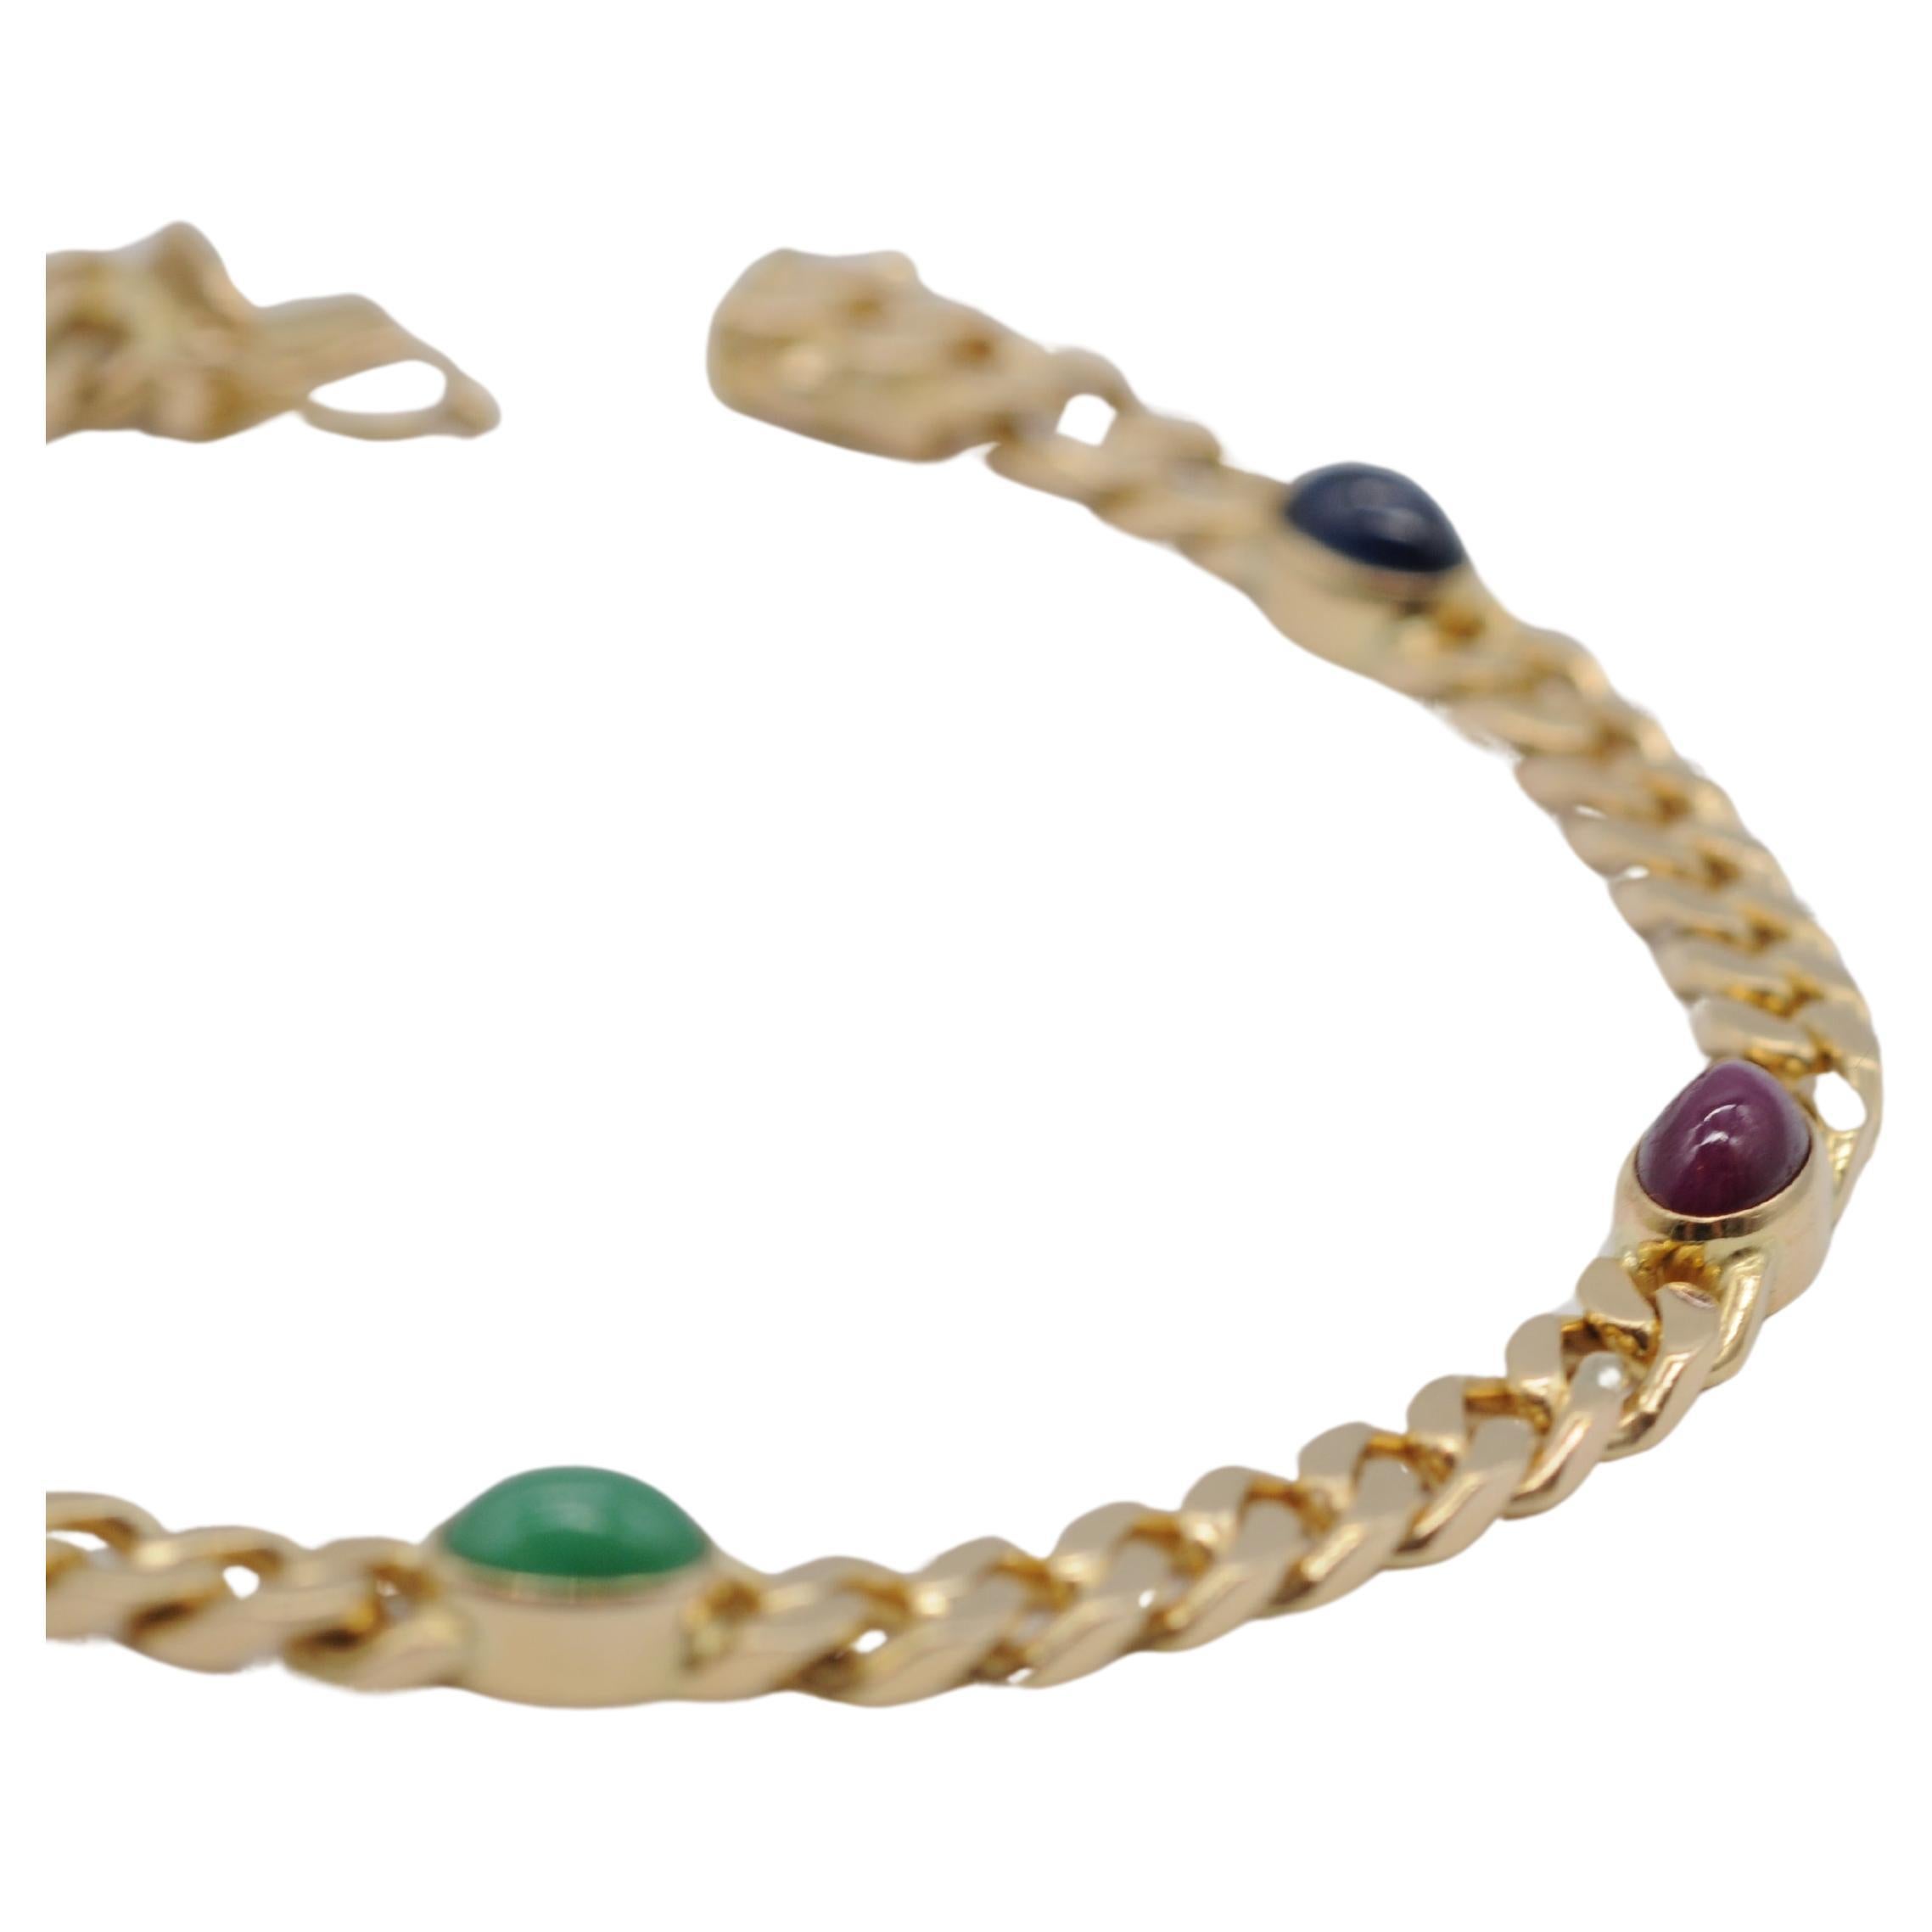 Noble 14k yellow gold bracelet with cabochon For Sale 1